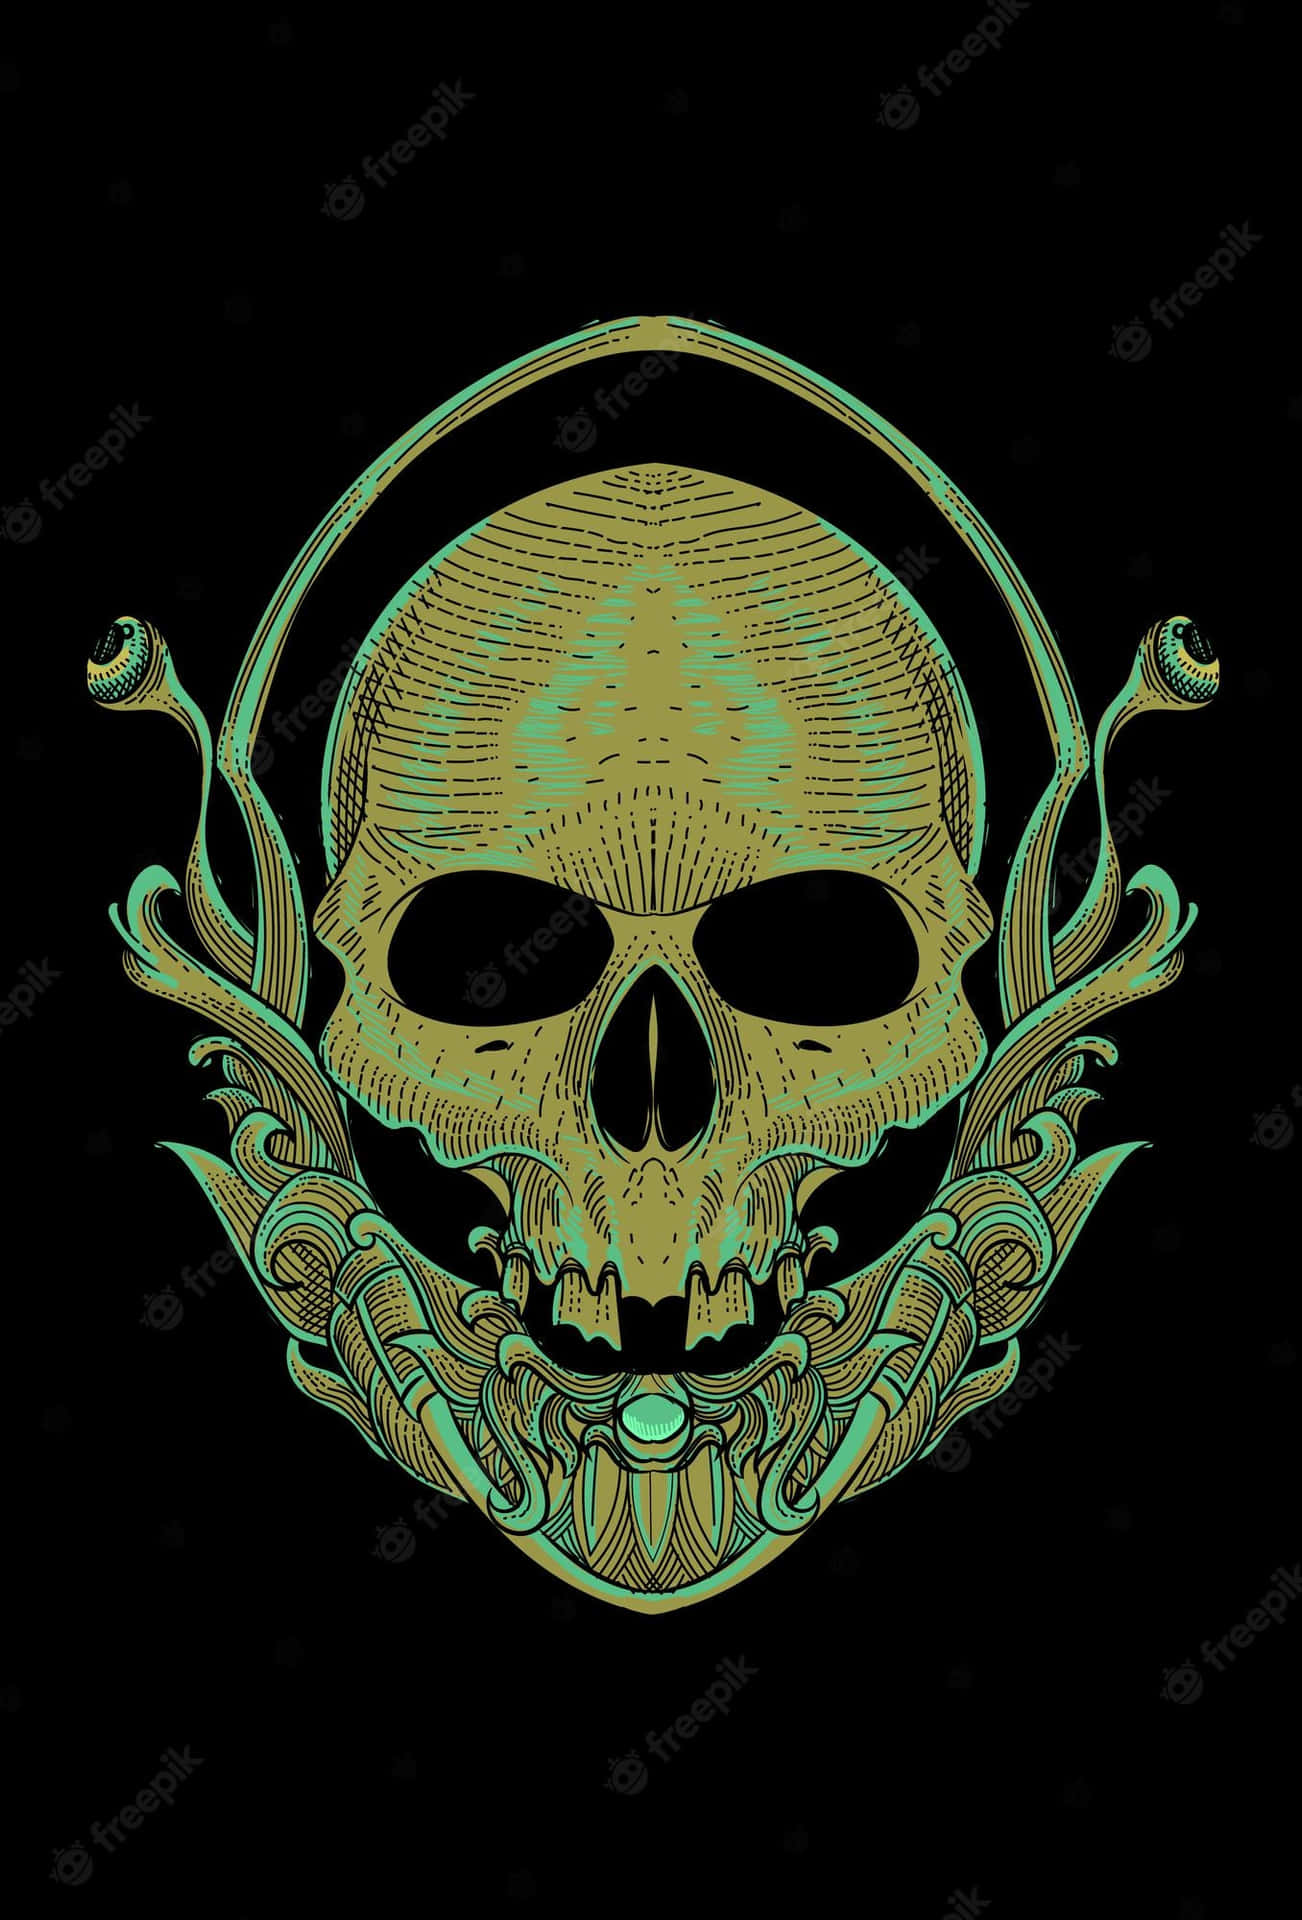 a skull with a green and gold design on a black background Wallpaper